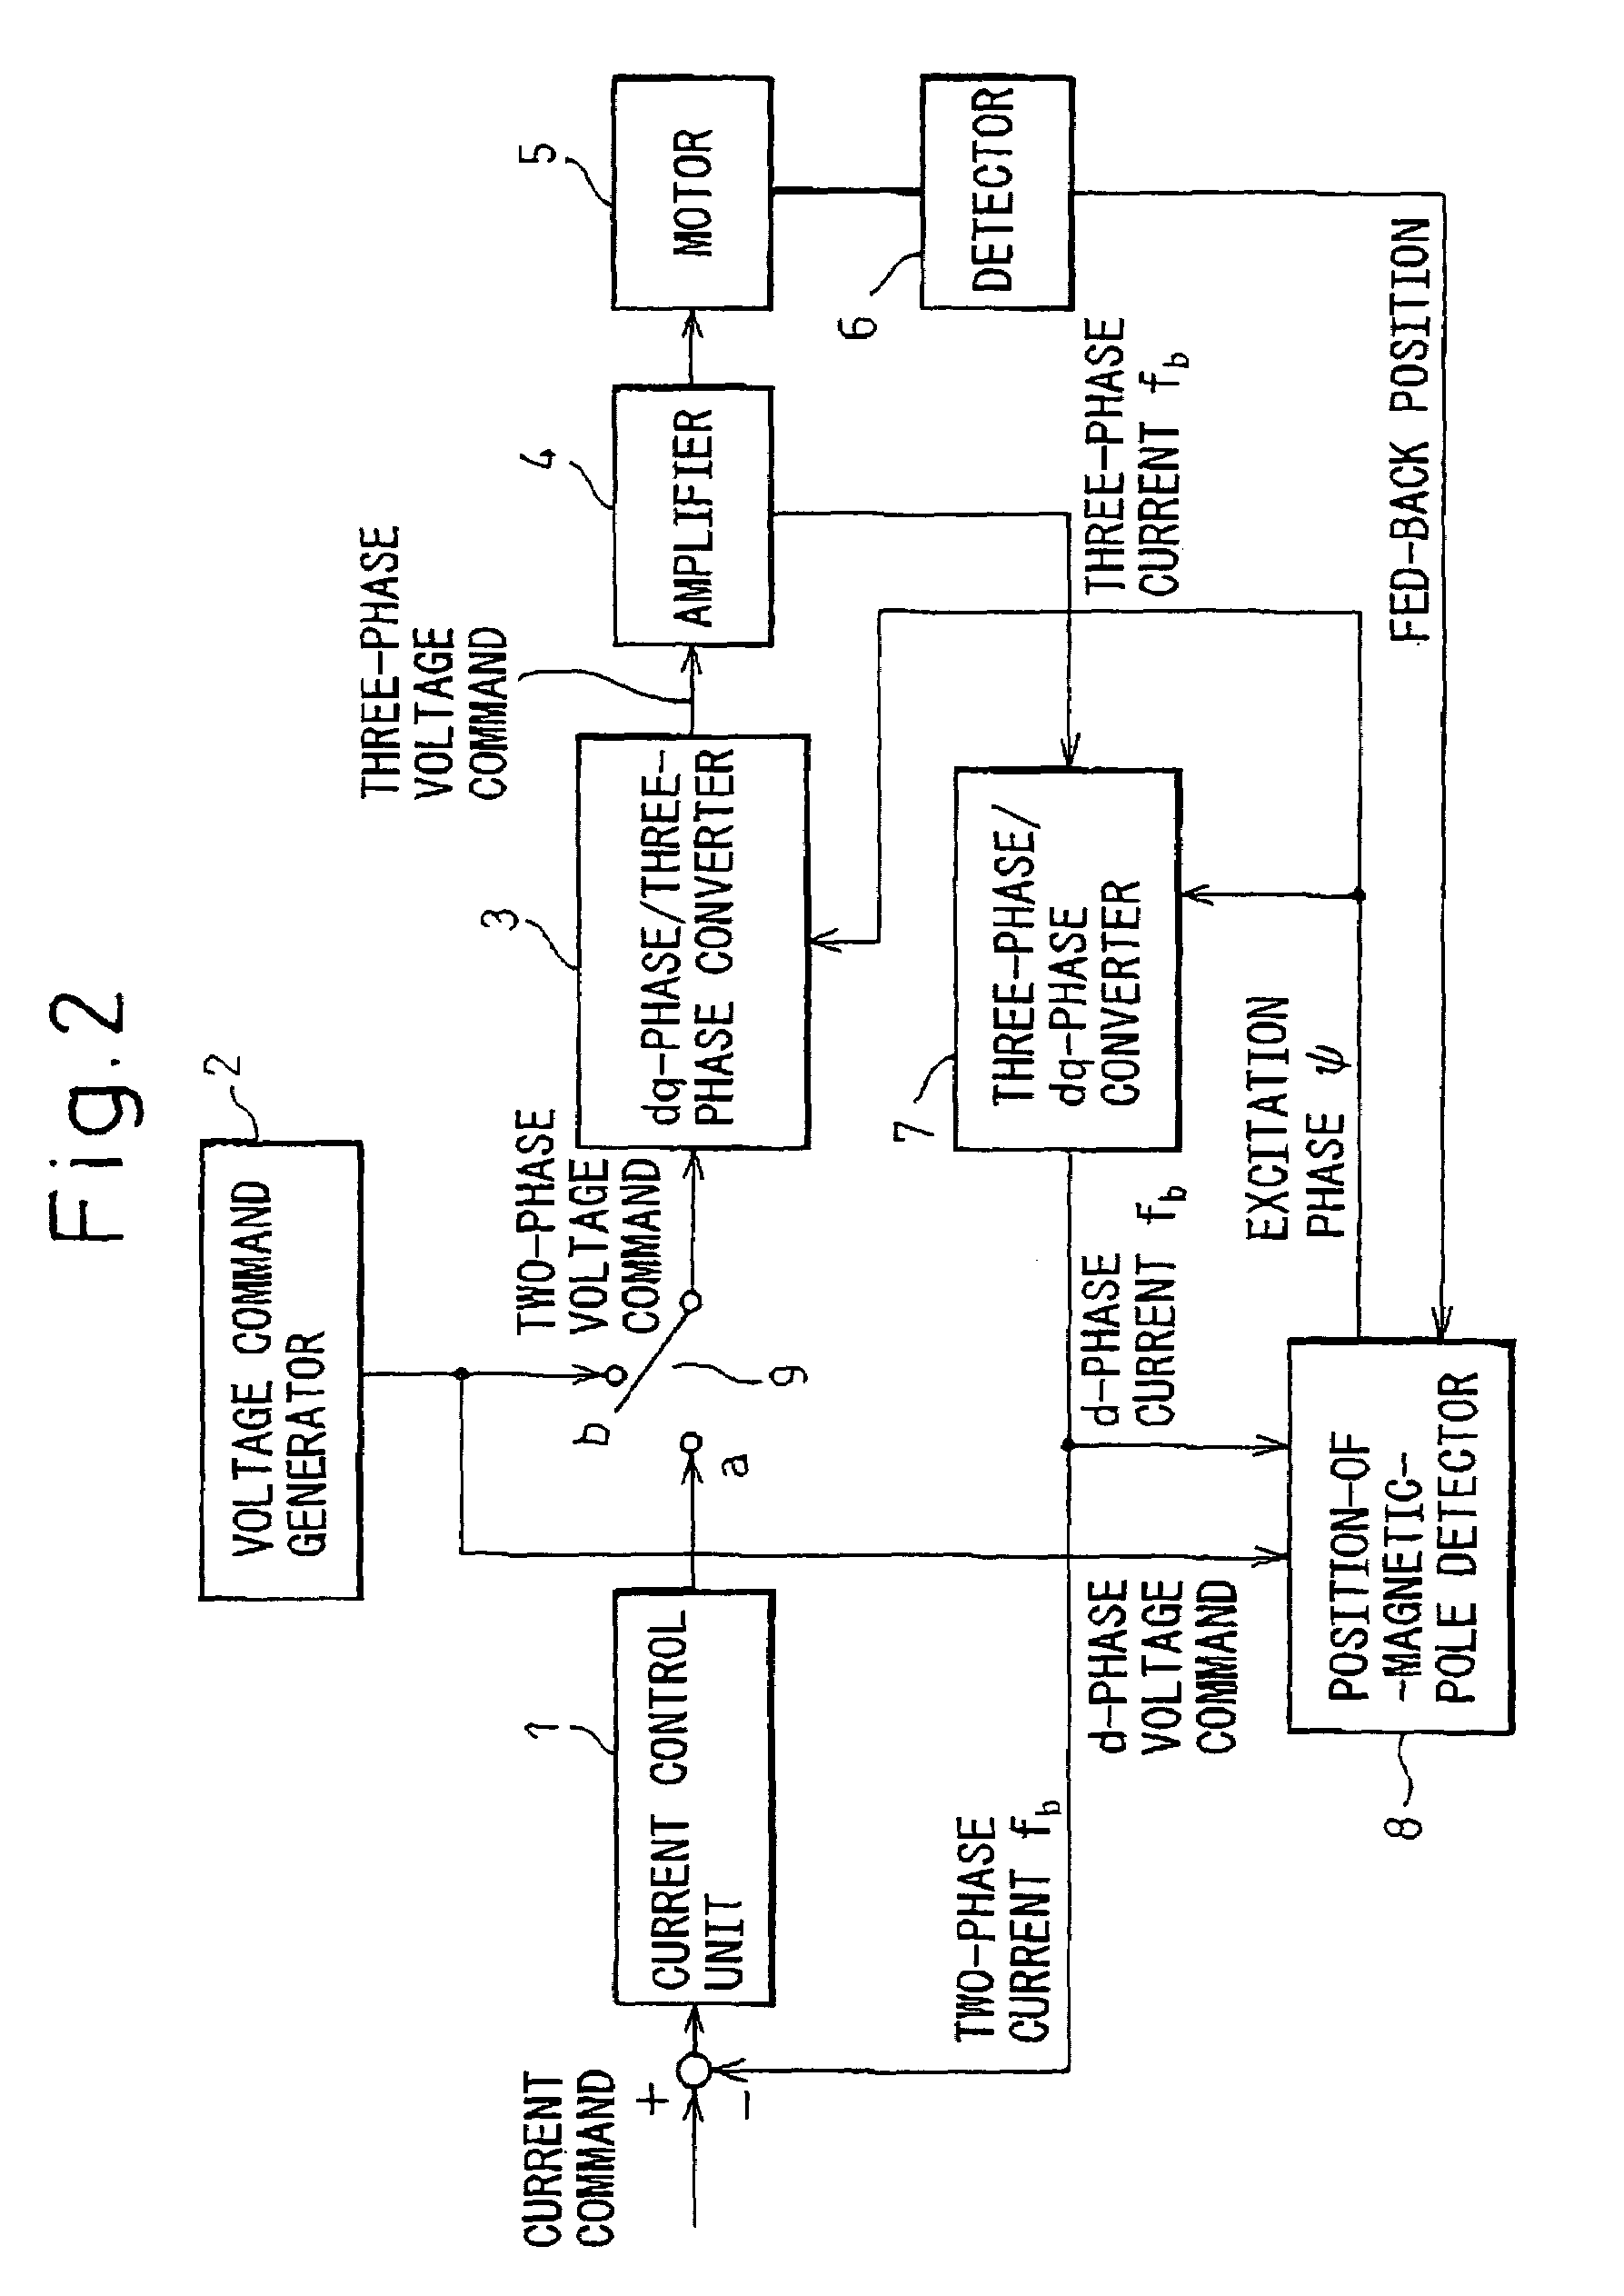 Position-of-magnetic-pole detecting device and method